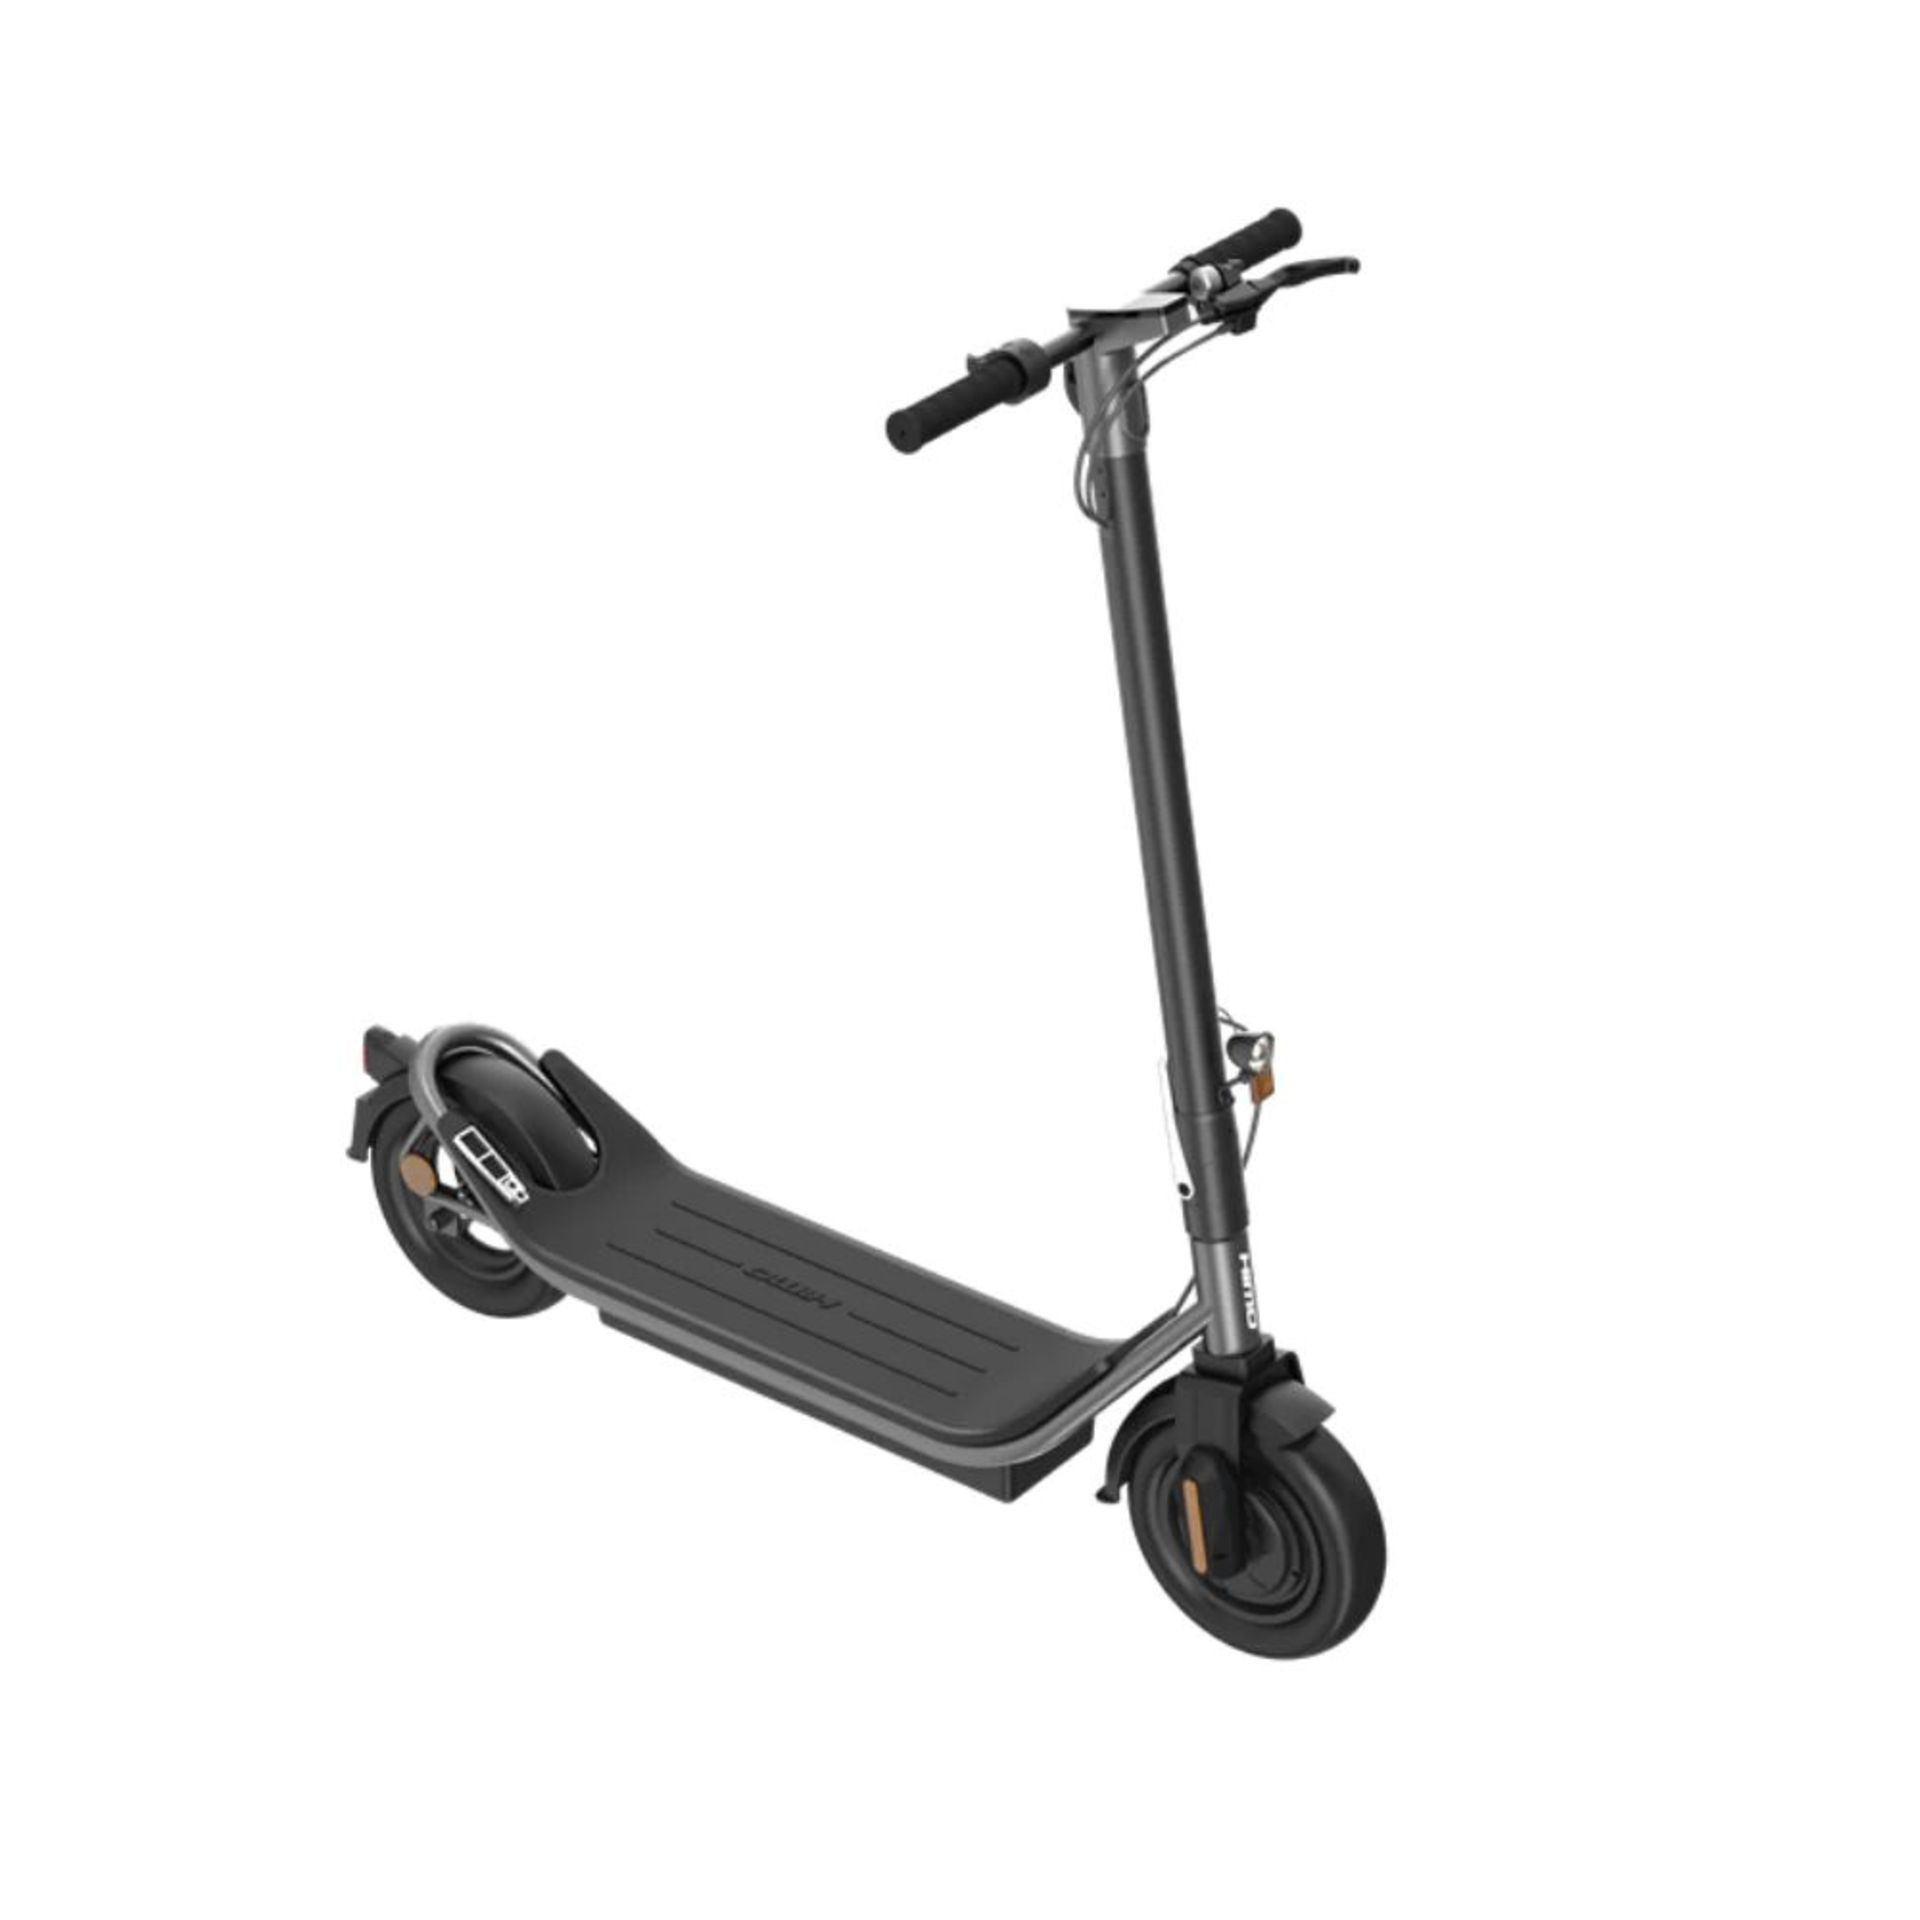 New & Boxed HIMO L2 Electric Scooter. RRP £499.99. The L2 is a rugged folding electric scooter